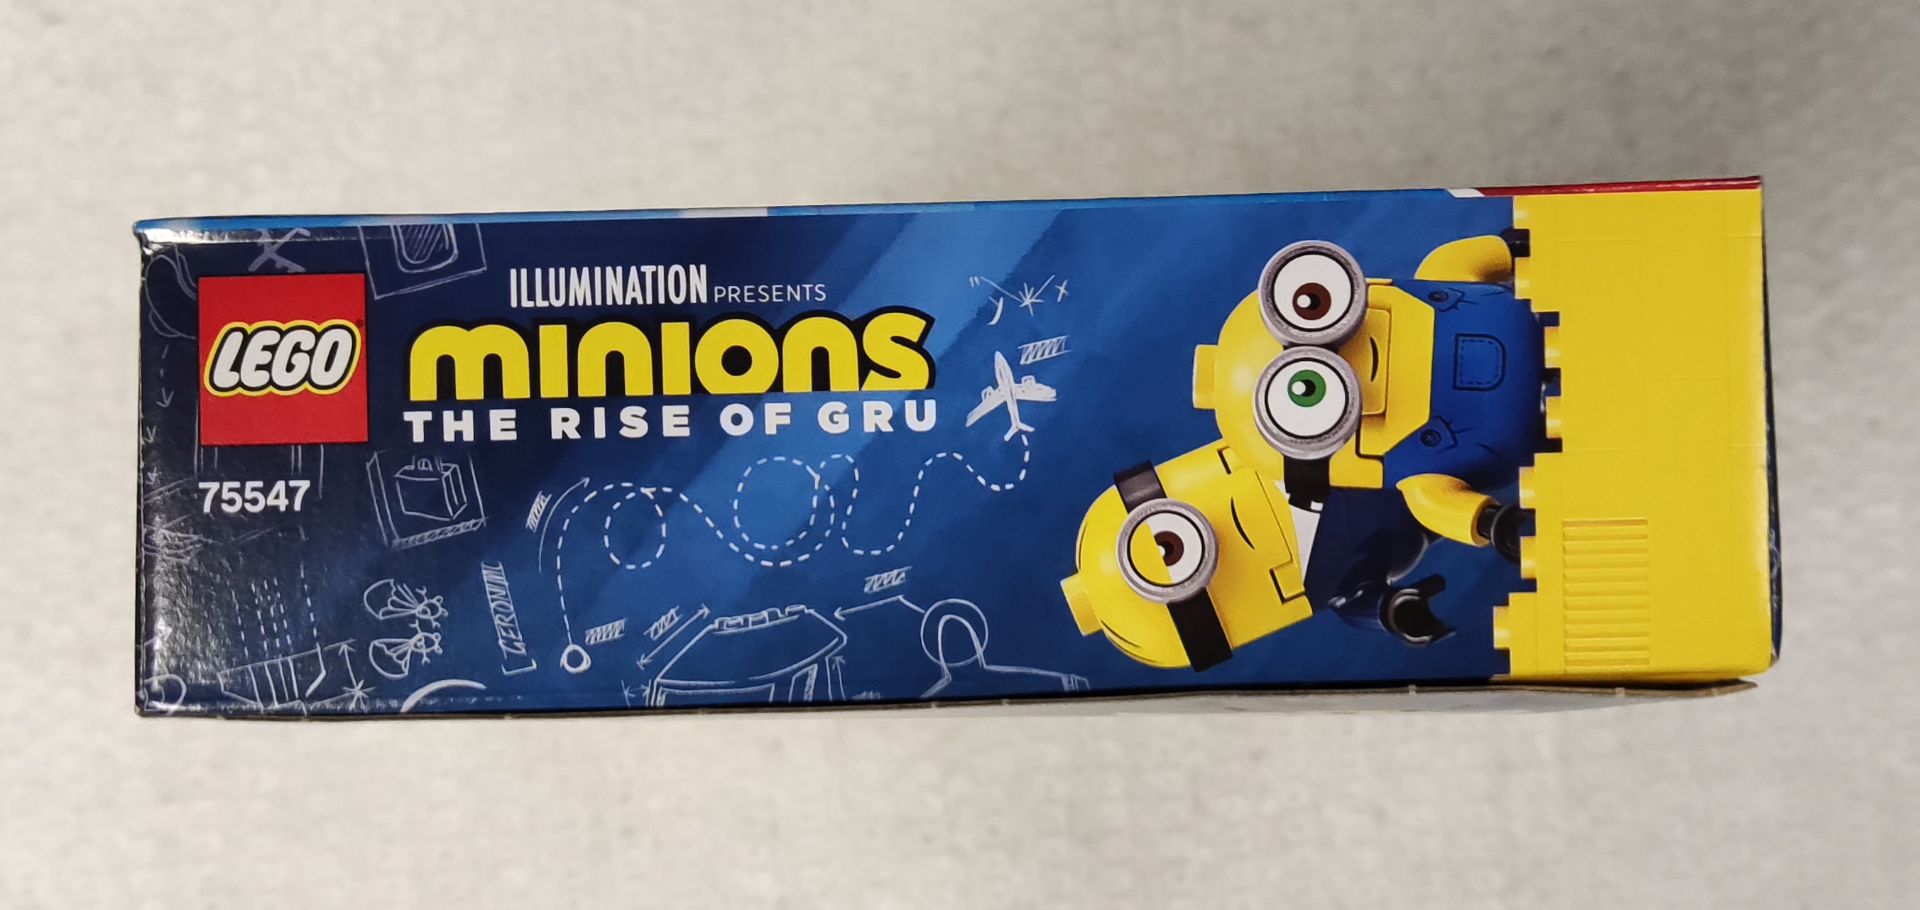 1 x Lego Minions The Rise Of Gru Minion Pilot In Training - Model 75547 - New/Boxed - Image 7 of 7